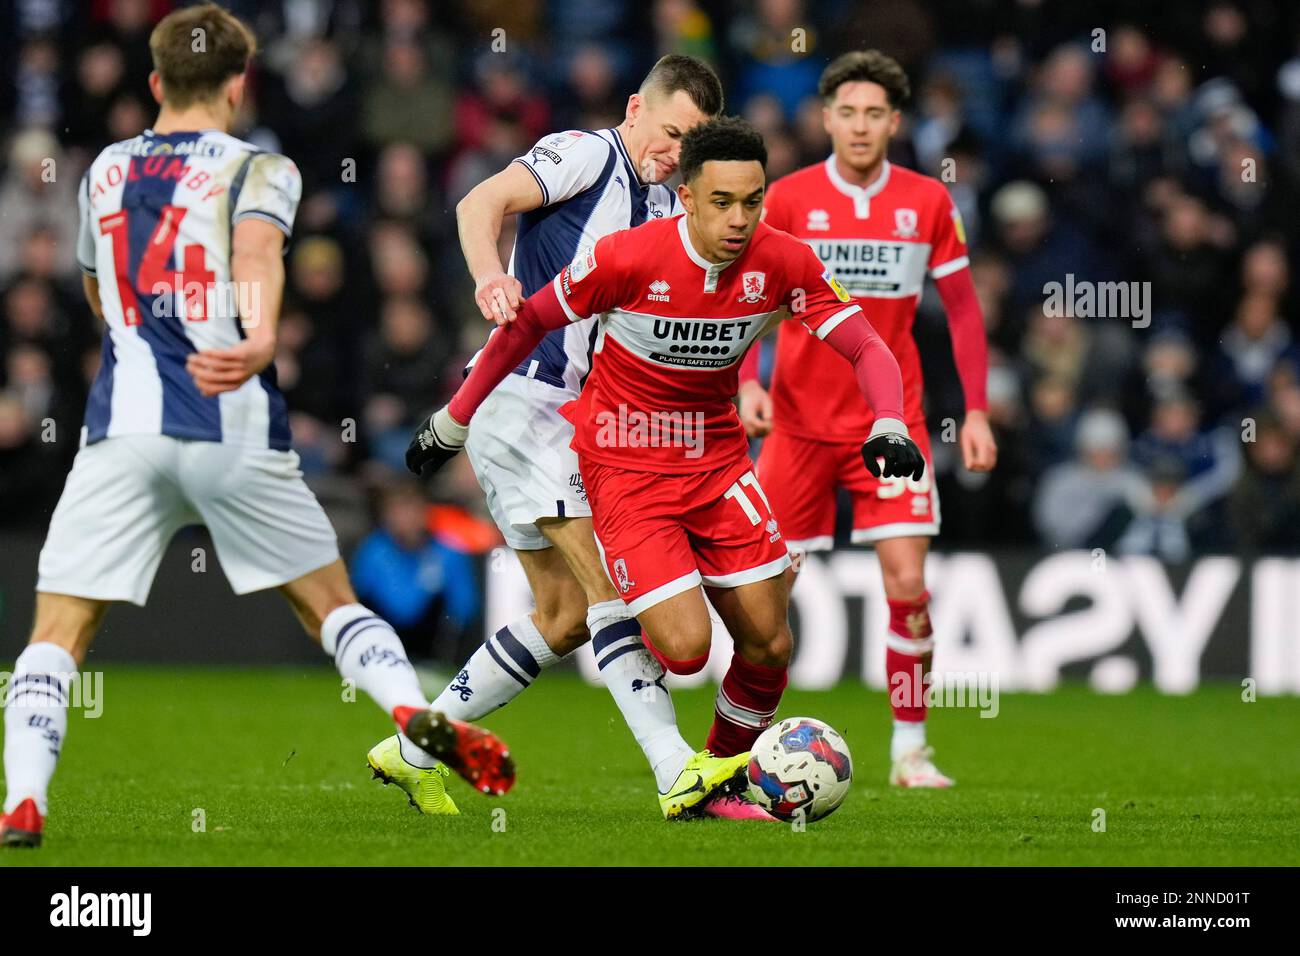 Jed Wallace #17 of West Bromwich Albion fouls Aaron Ramsey #11 of Middlesbrough during the Sky Bet Championship match West Bromwich Albion vs Middlesbrough at The Hawthorns, West Bromwich, United Kingdom, 25th February 2023  (Photo by Steve Flynn/News Images) Stock Photo